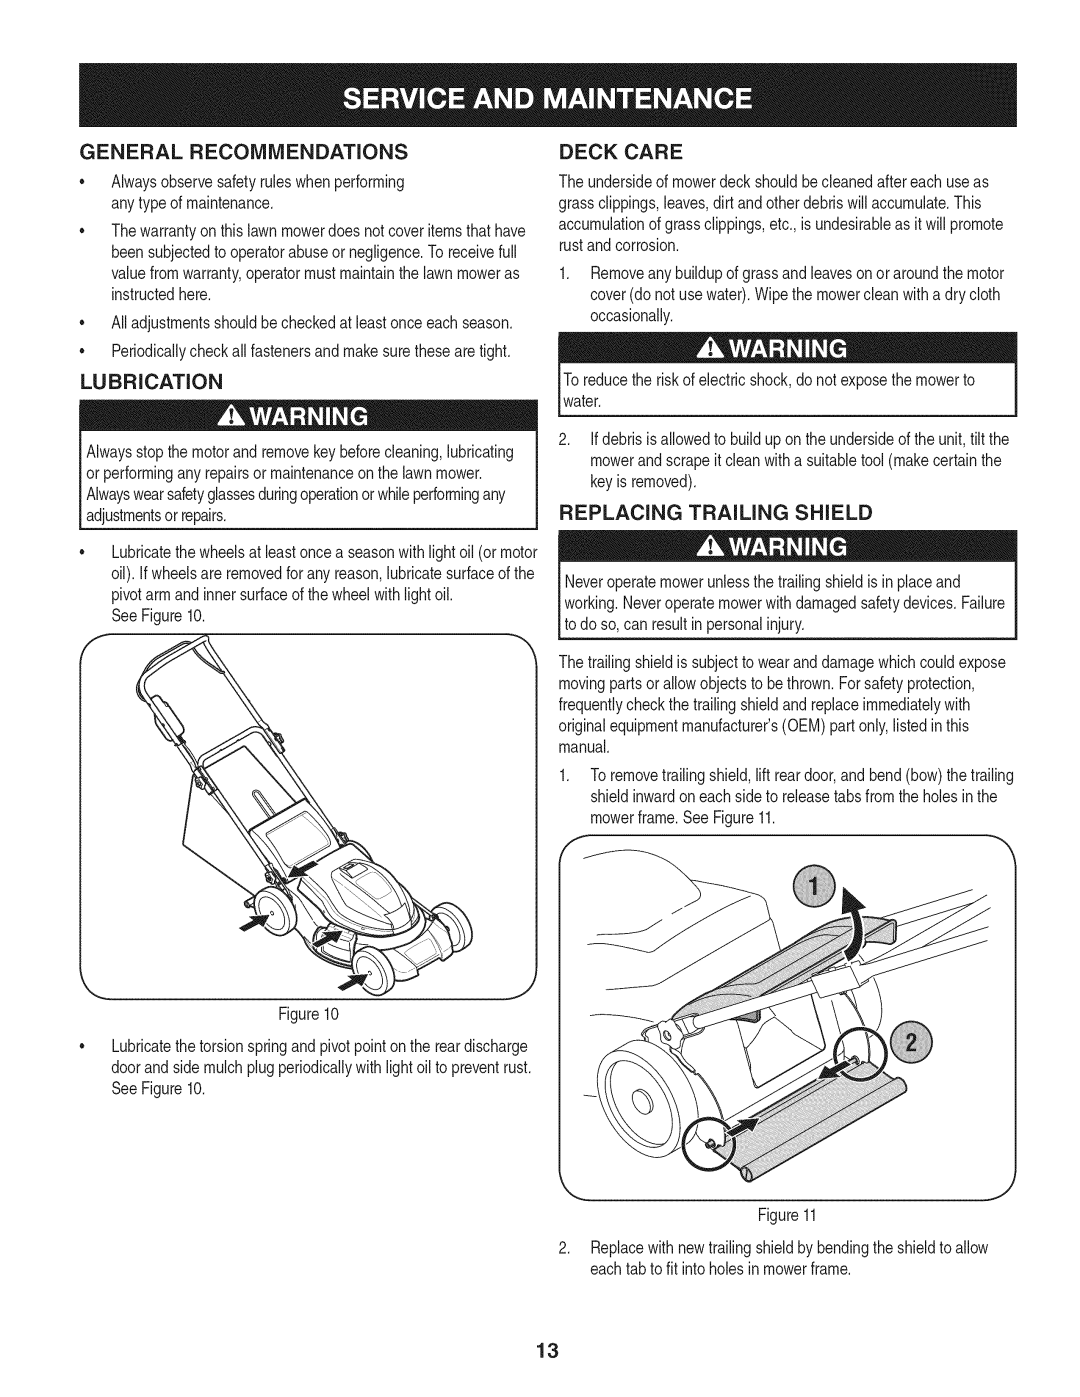 Craftsman 247.370480 manual General Recommendations, Lubrication, Deck Care, Replacing Trailing Shield, instructedhere 